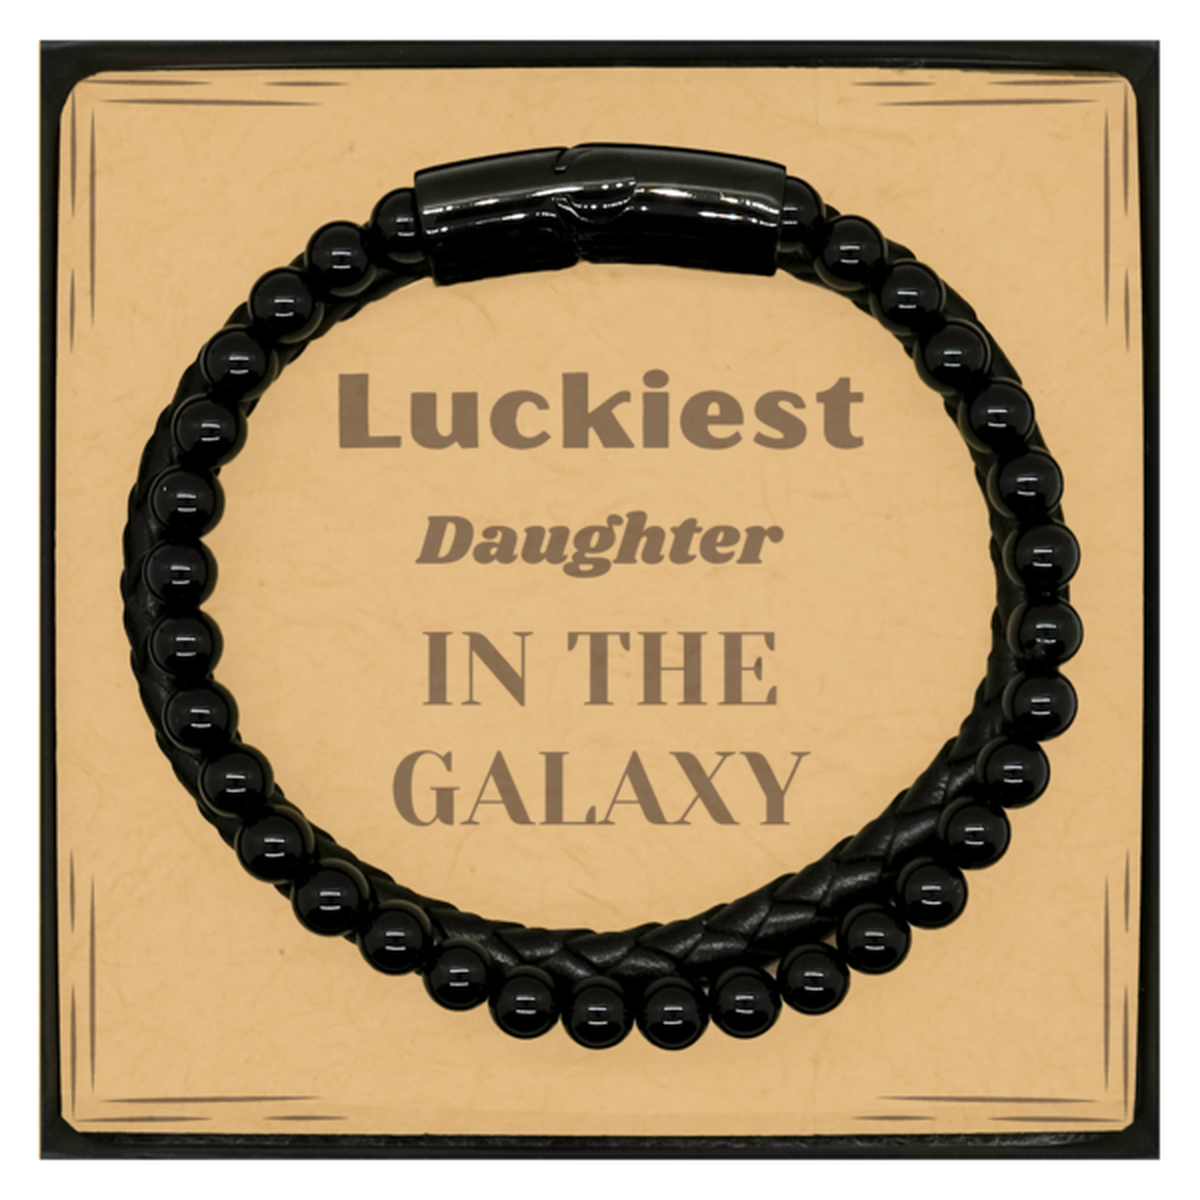 Luckiest Daughter in the Galaxy, To My Daughter Message Card Gifts, Christmas Daughter Stone Leather Bracelets Gifts, X-mas Birthday Unique Gifts For Daughter Men Women